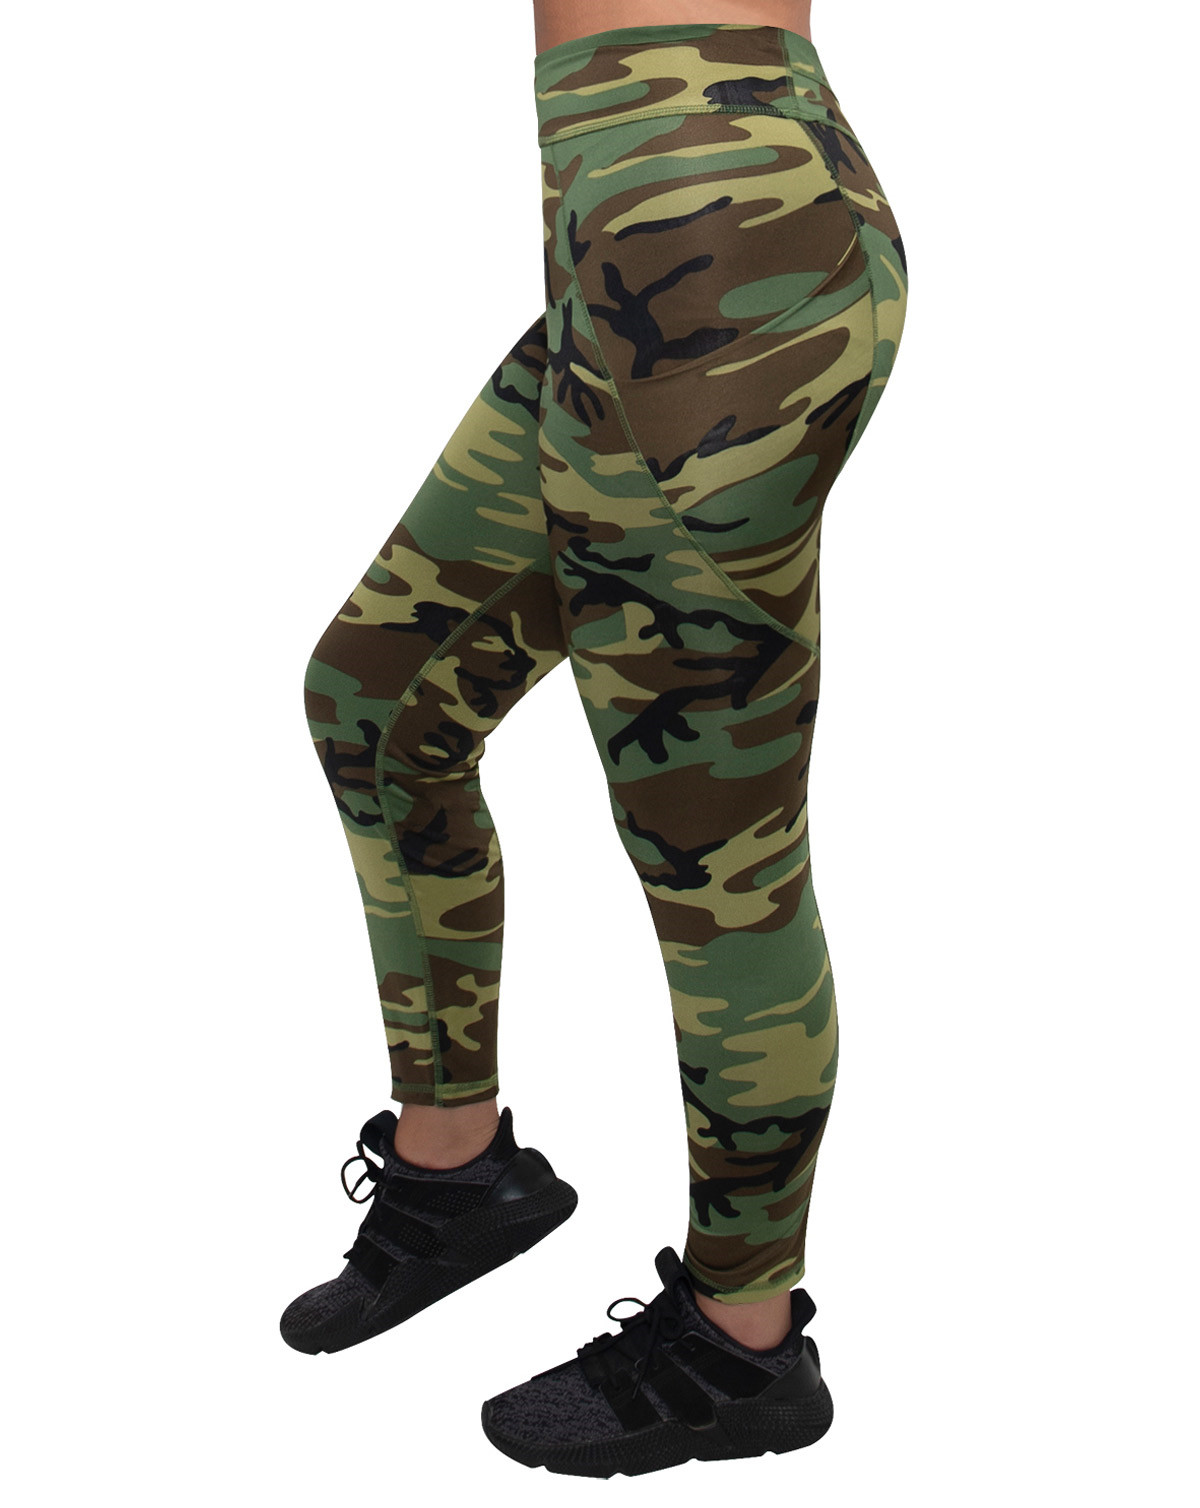 #2 - Rothco Womens Workout Performance Camo Leggings With Pockets (Woodland, L)